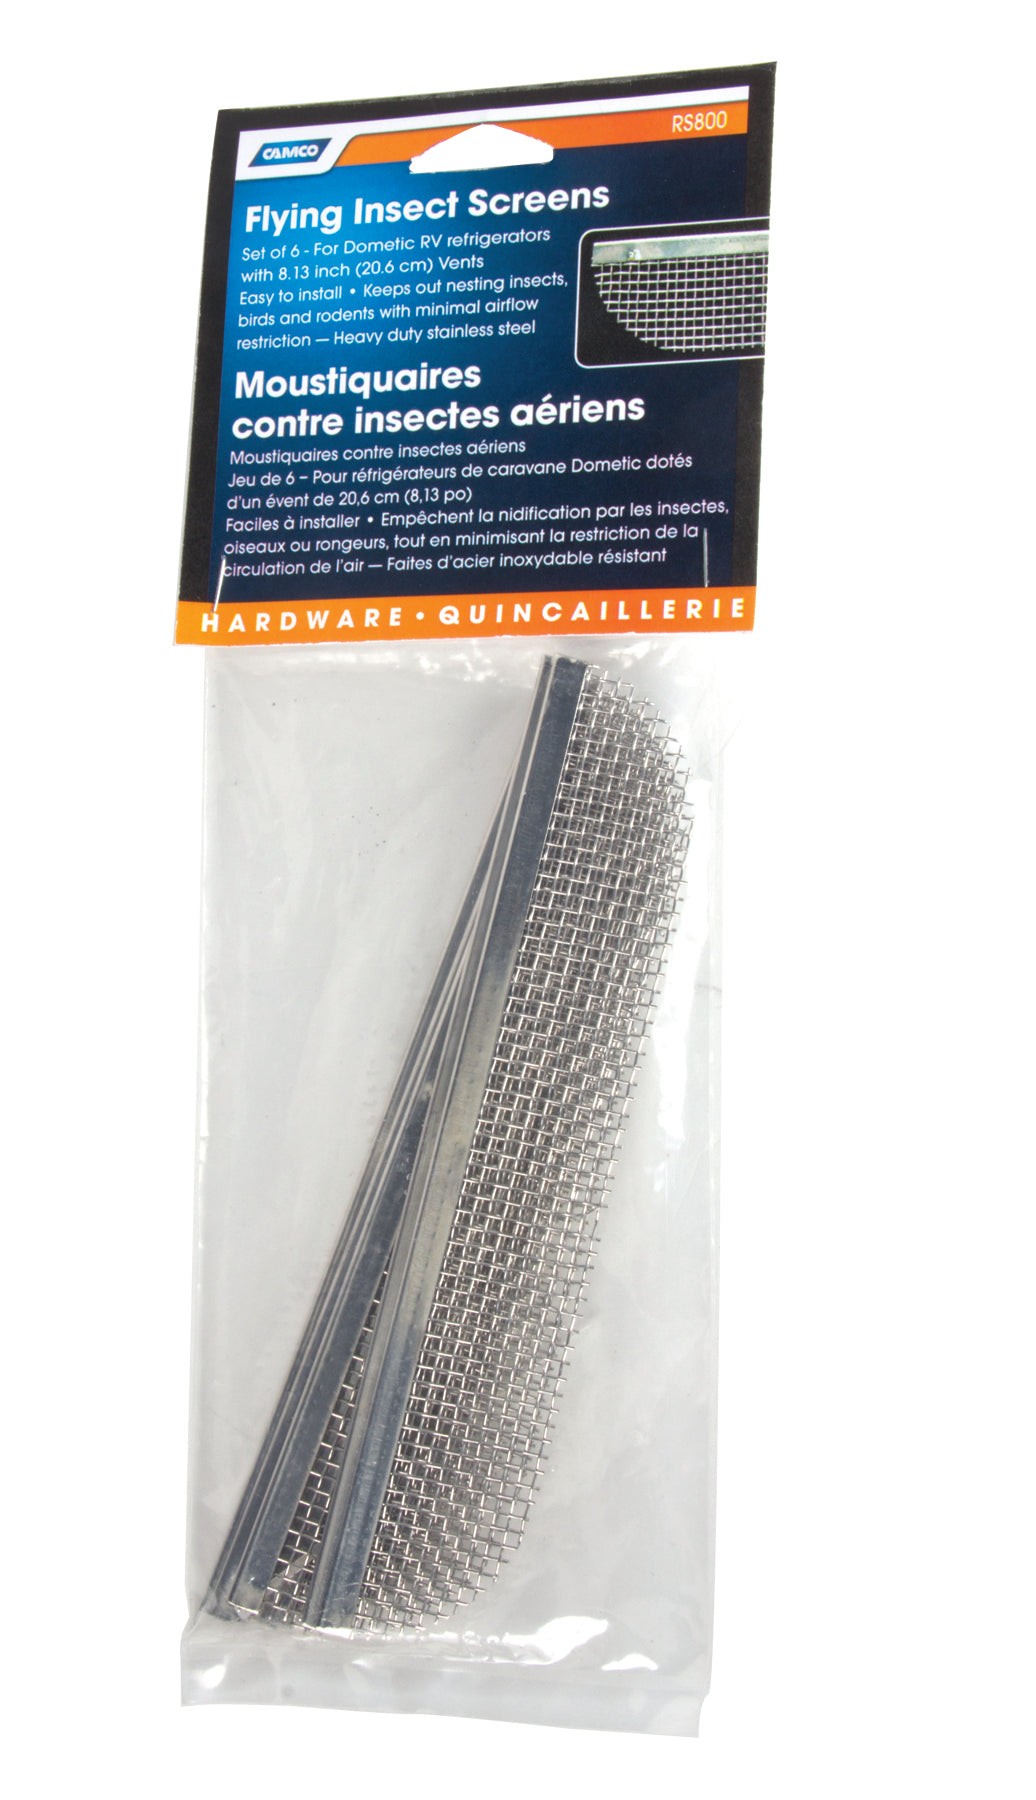 Camco 6Pk Flying Insect Screen